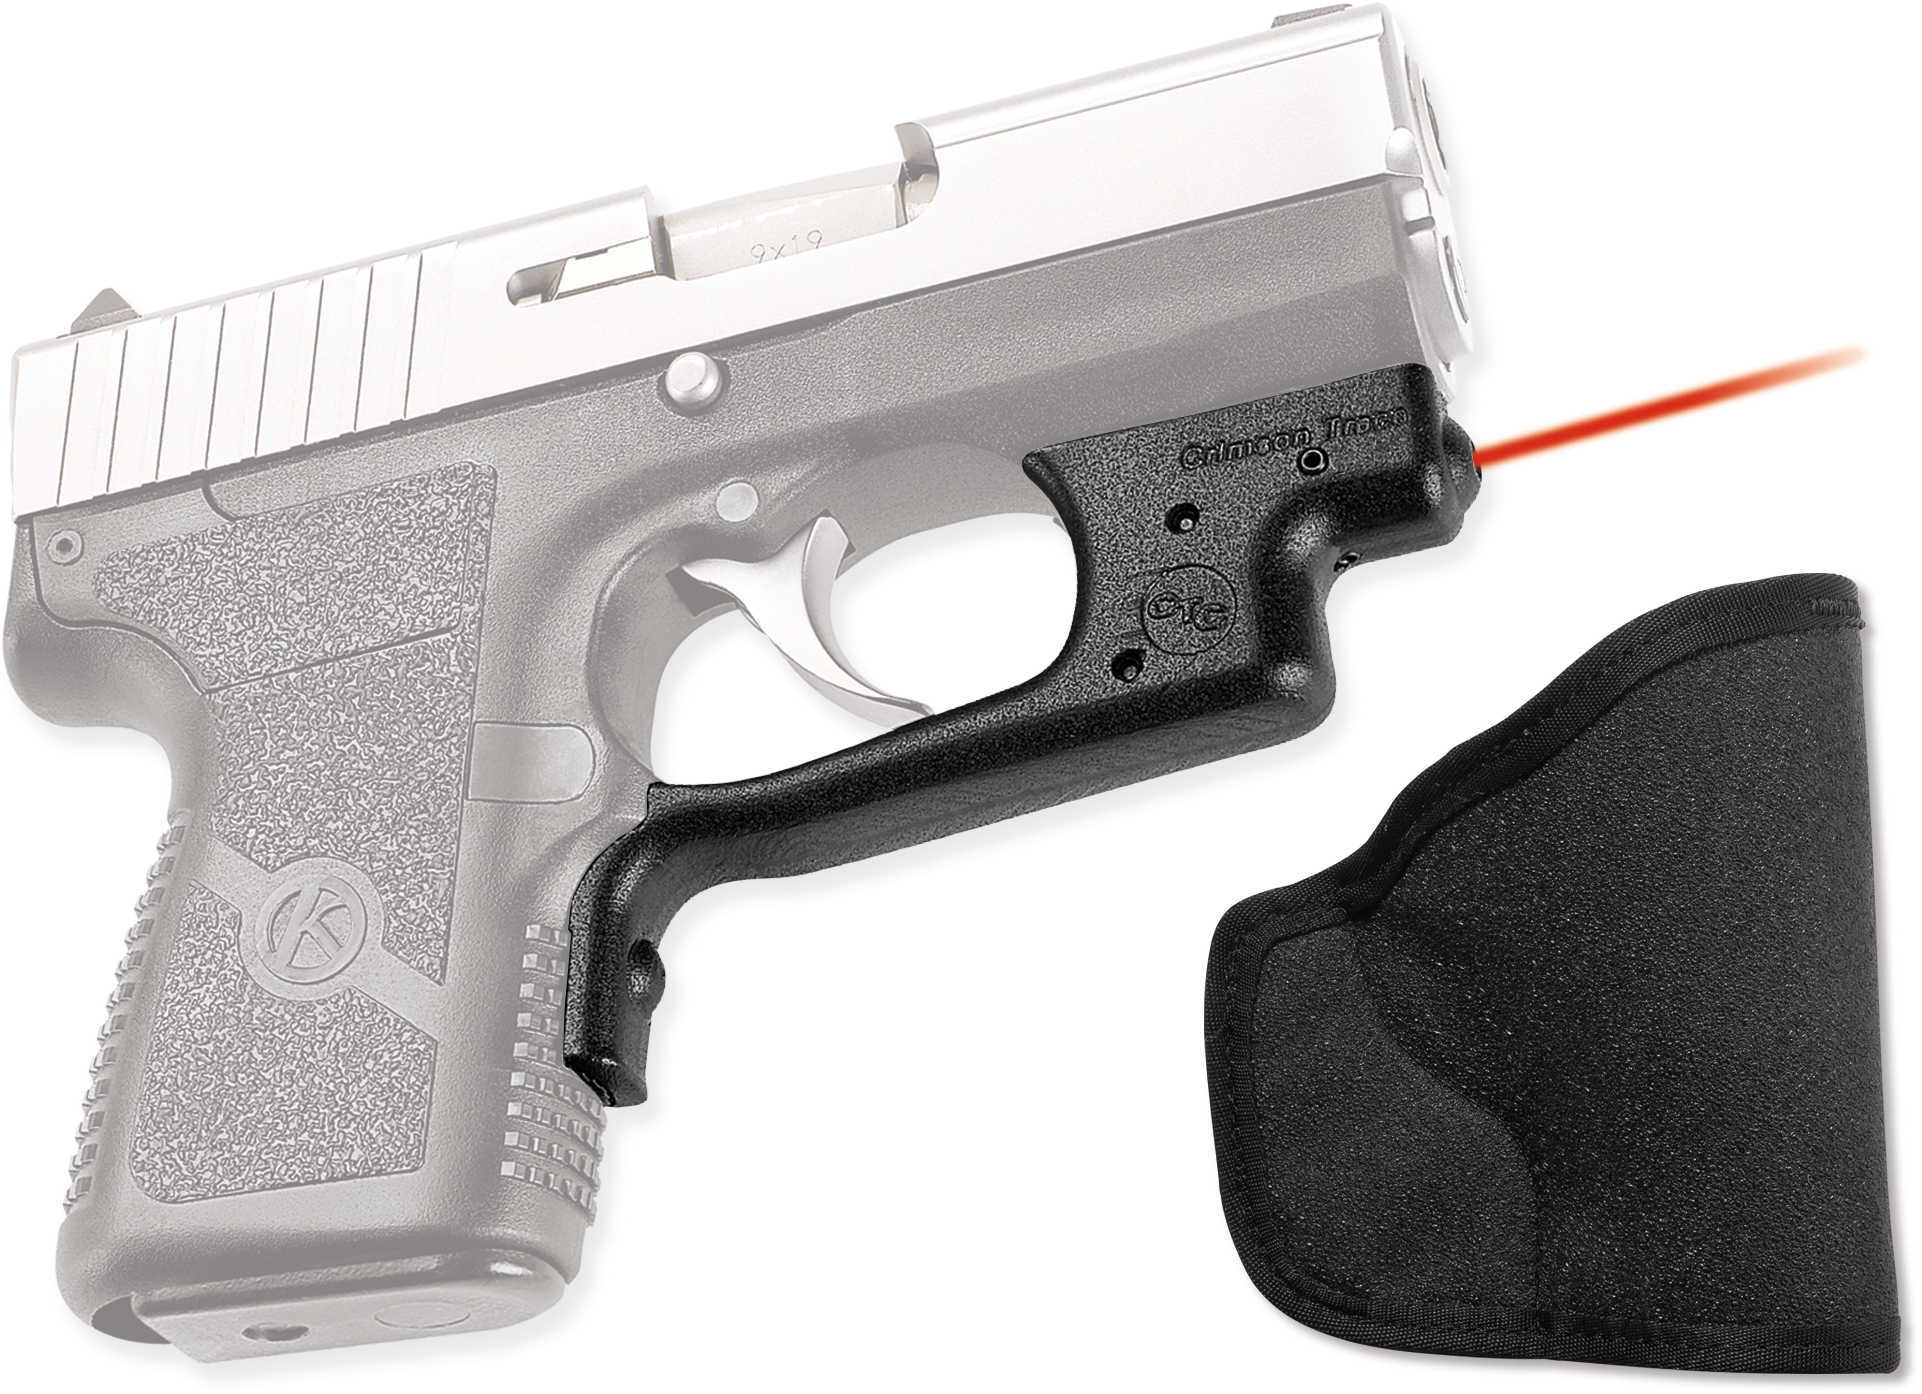 Crimson Trace Kahr CW9-PM40 Polymer Overmold Front Activation LG-437H